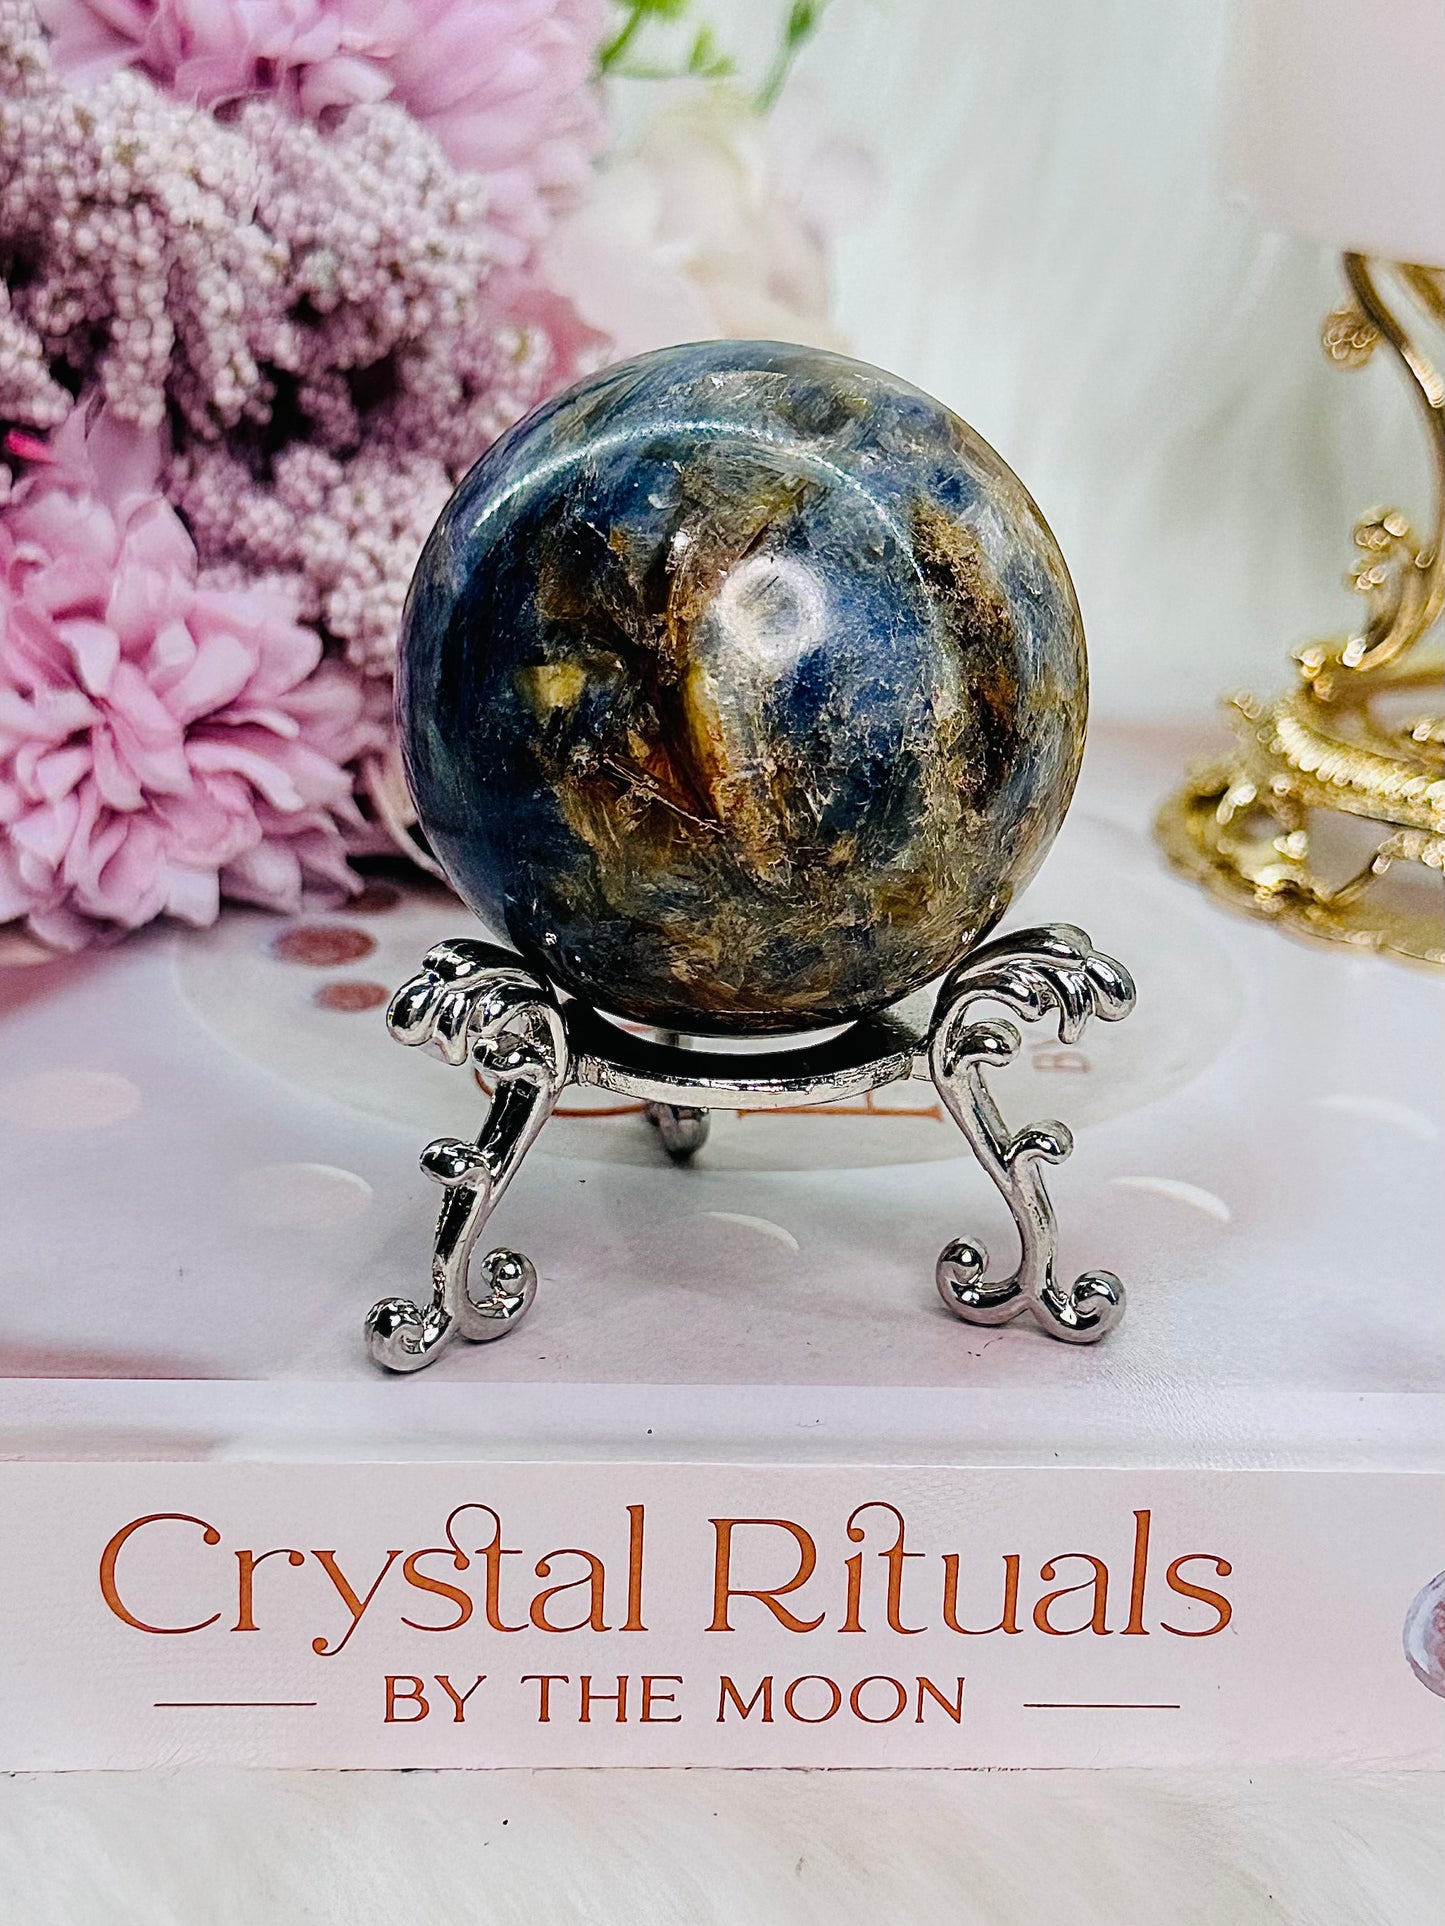 Brings Tranquility ~ Lovely Blue Kyanite Sphere on Stand 223grams